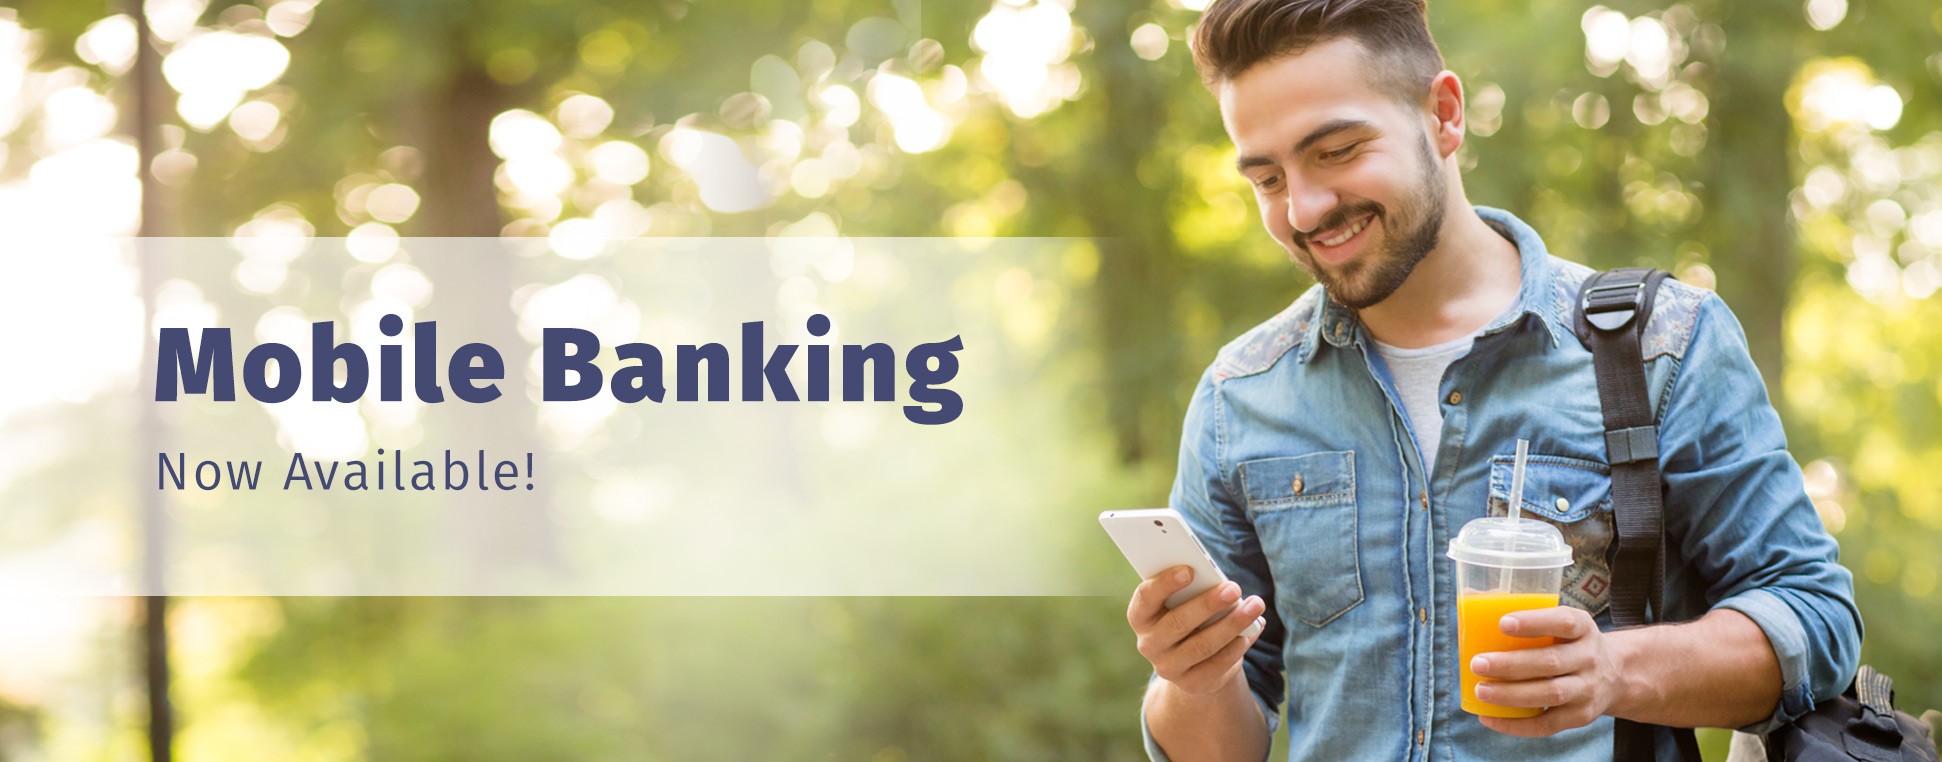 Mobile Banking Now Available